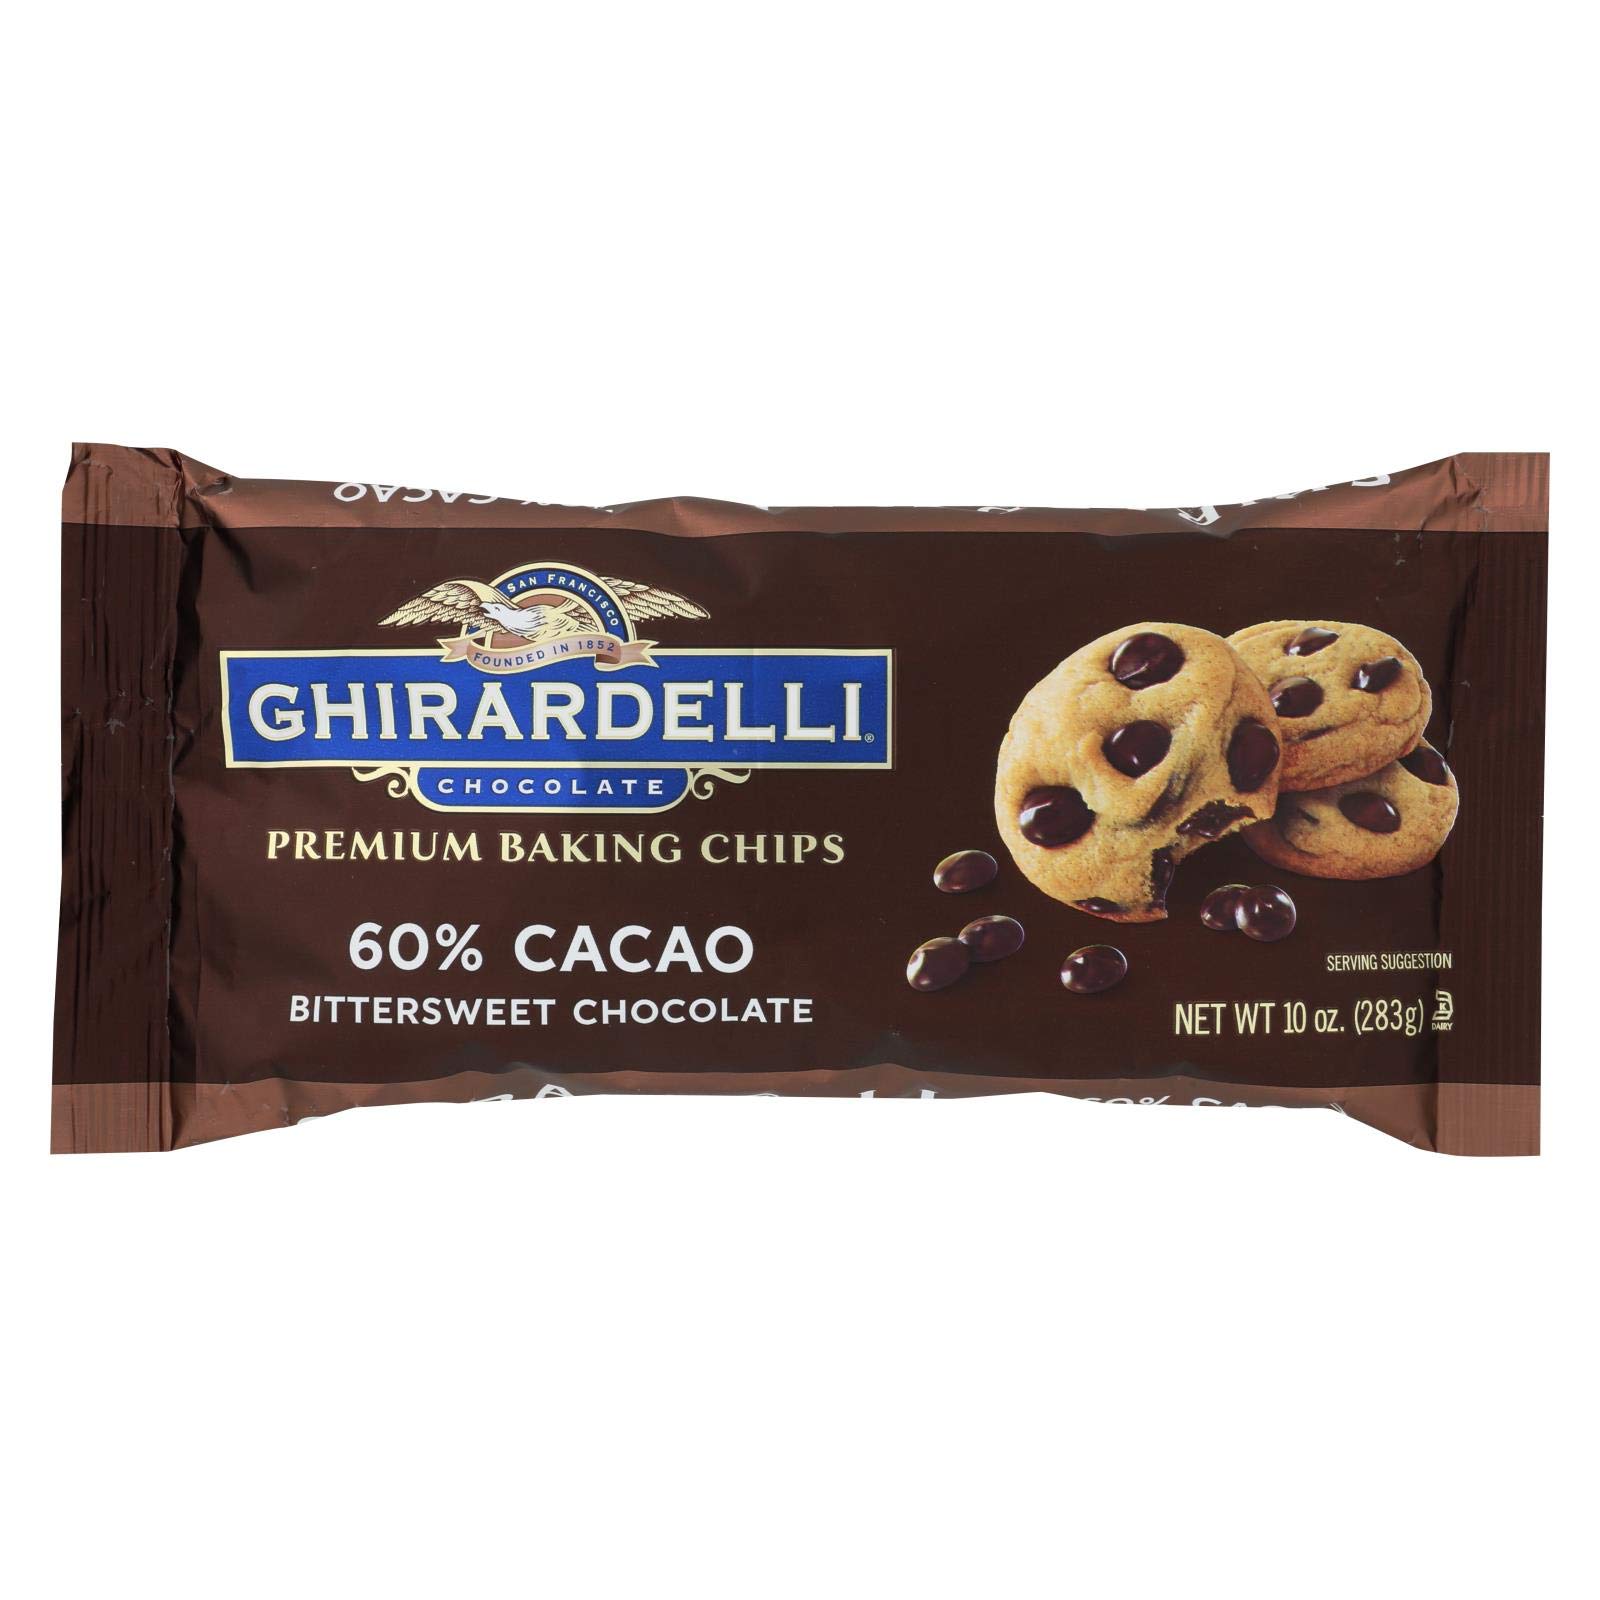 Ghirardelli Chocolat 60% cacao Bittersweet chocolate Baking chips 10 Ounces (case of 12)